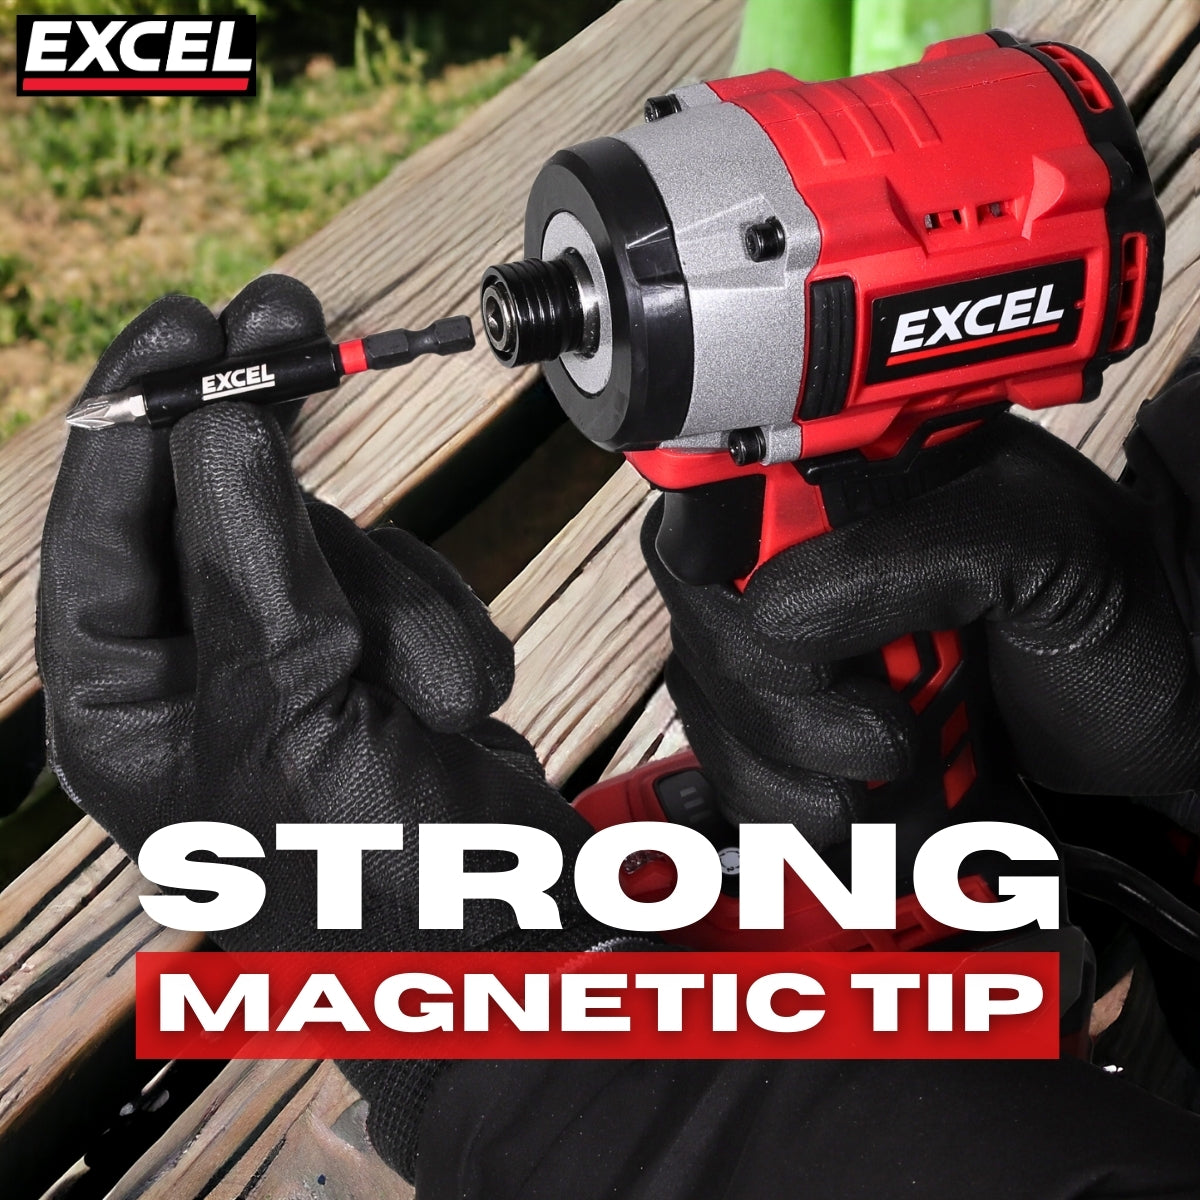 Excel 60mm Magnetic Impact Bit Holder with Blister Card